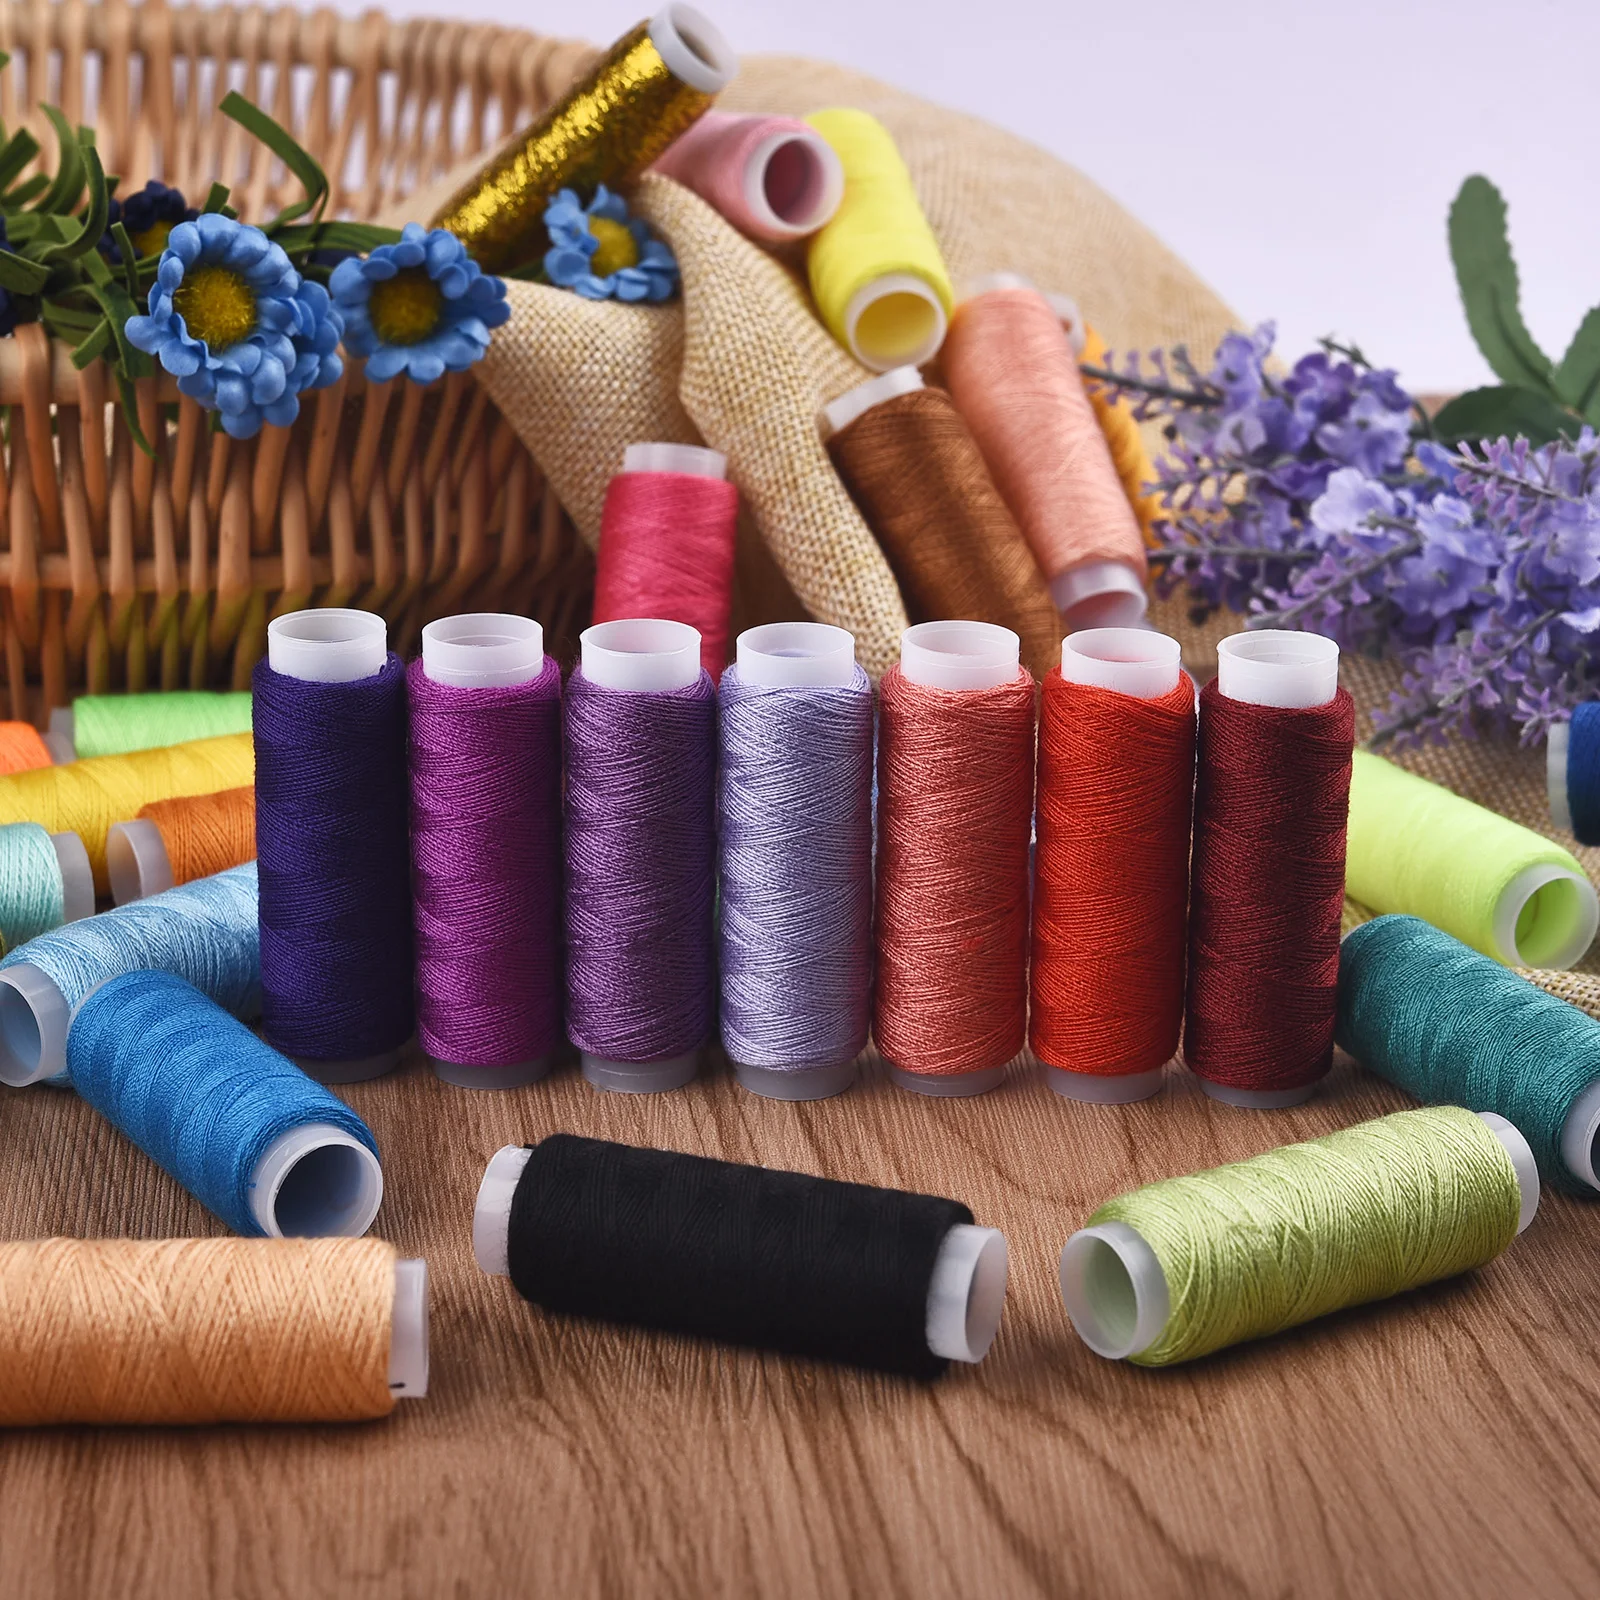 Colourful 100% Linen Thread 120m/roll Twine Cords For Sewing Knitting  Embroidery Crochet Accessory Diy - Thread - AliExpress